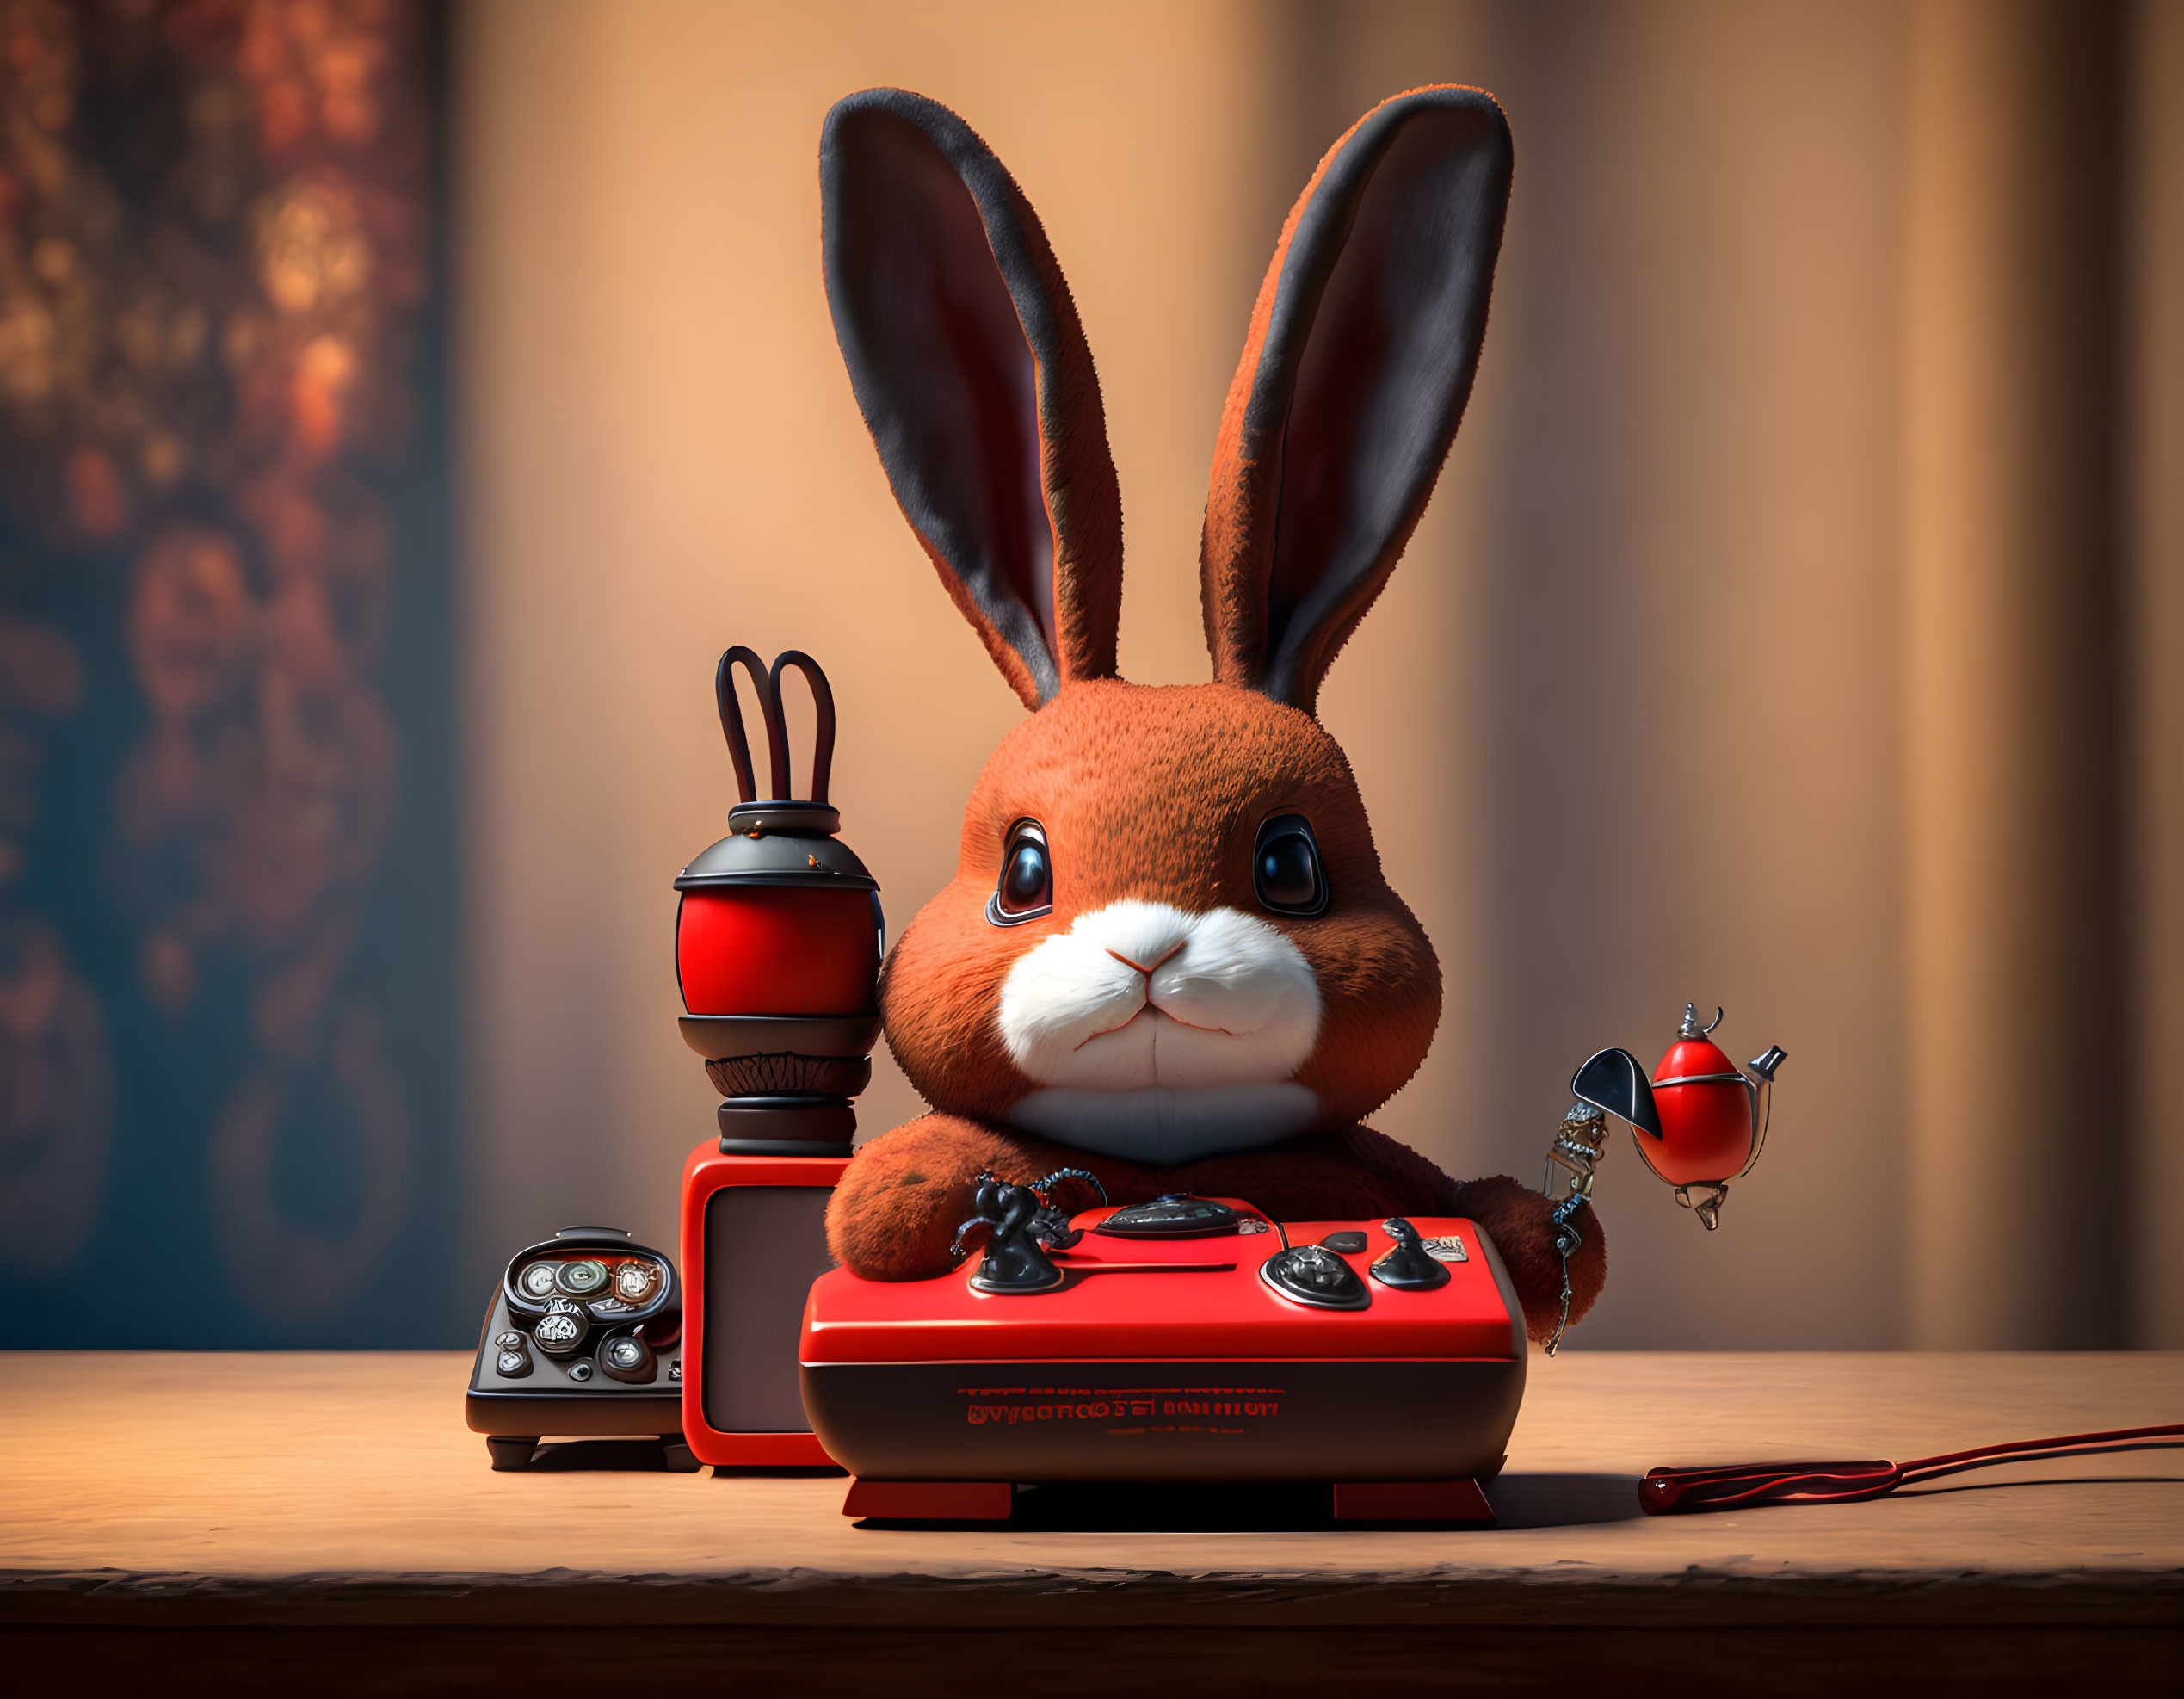 beasterbunny with the red telephone